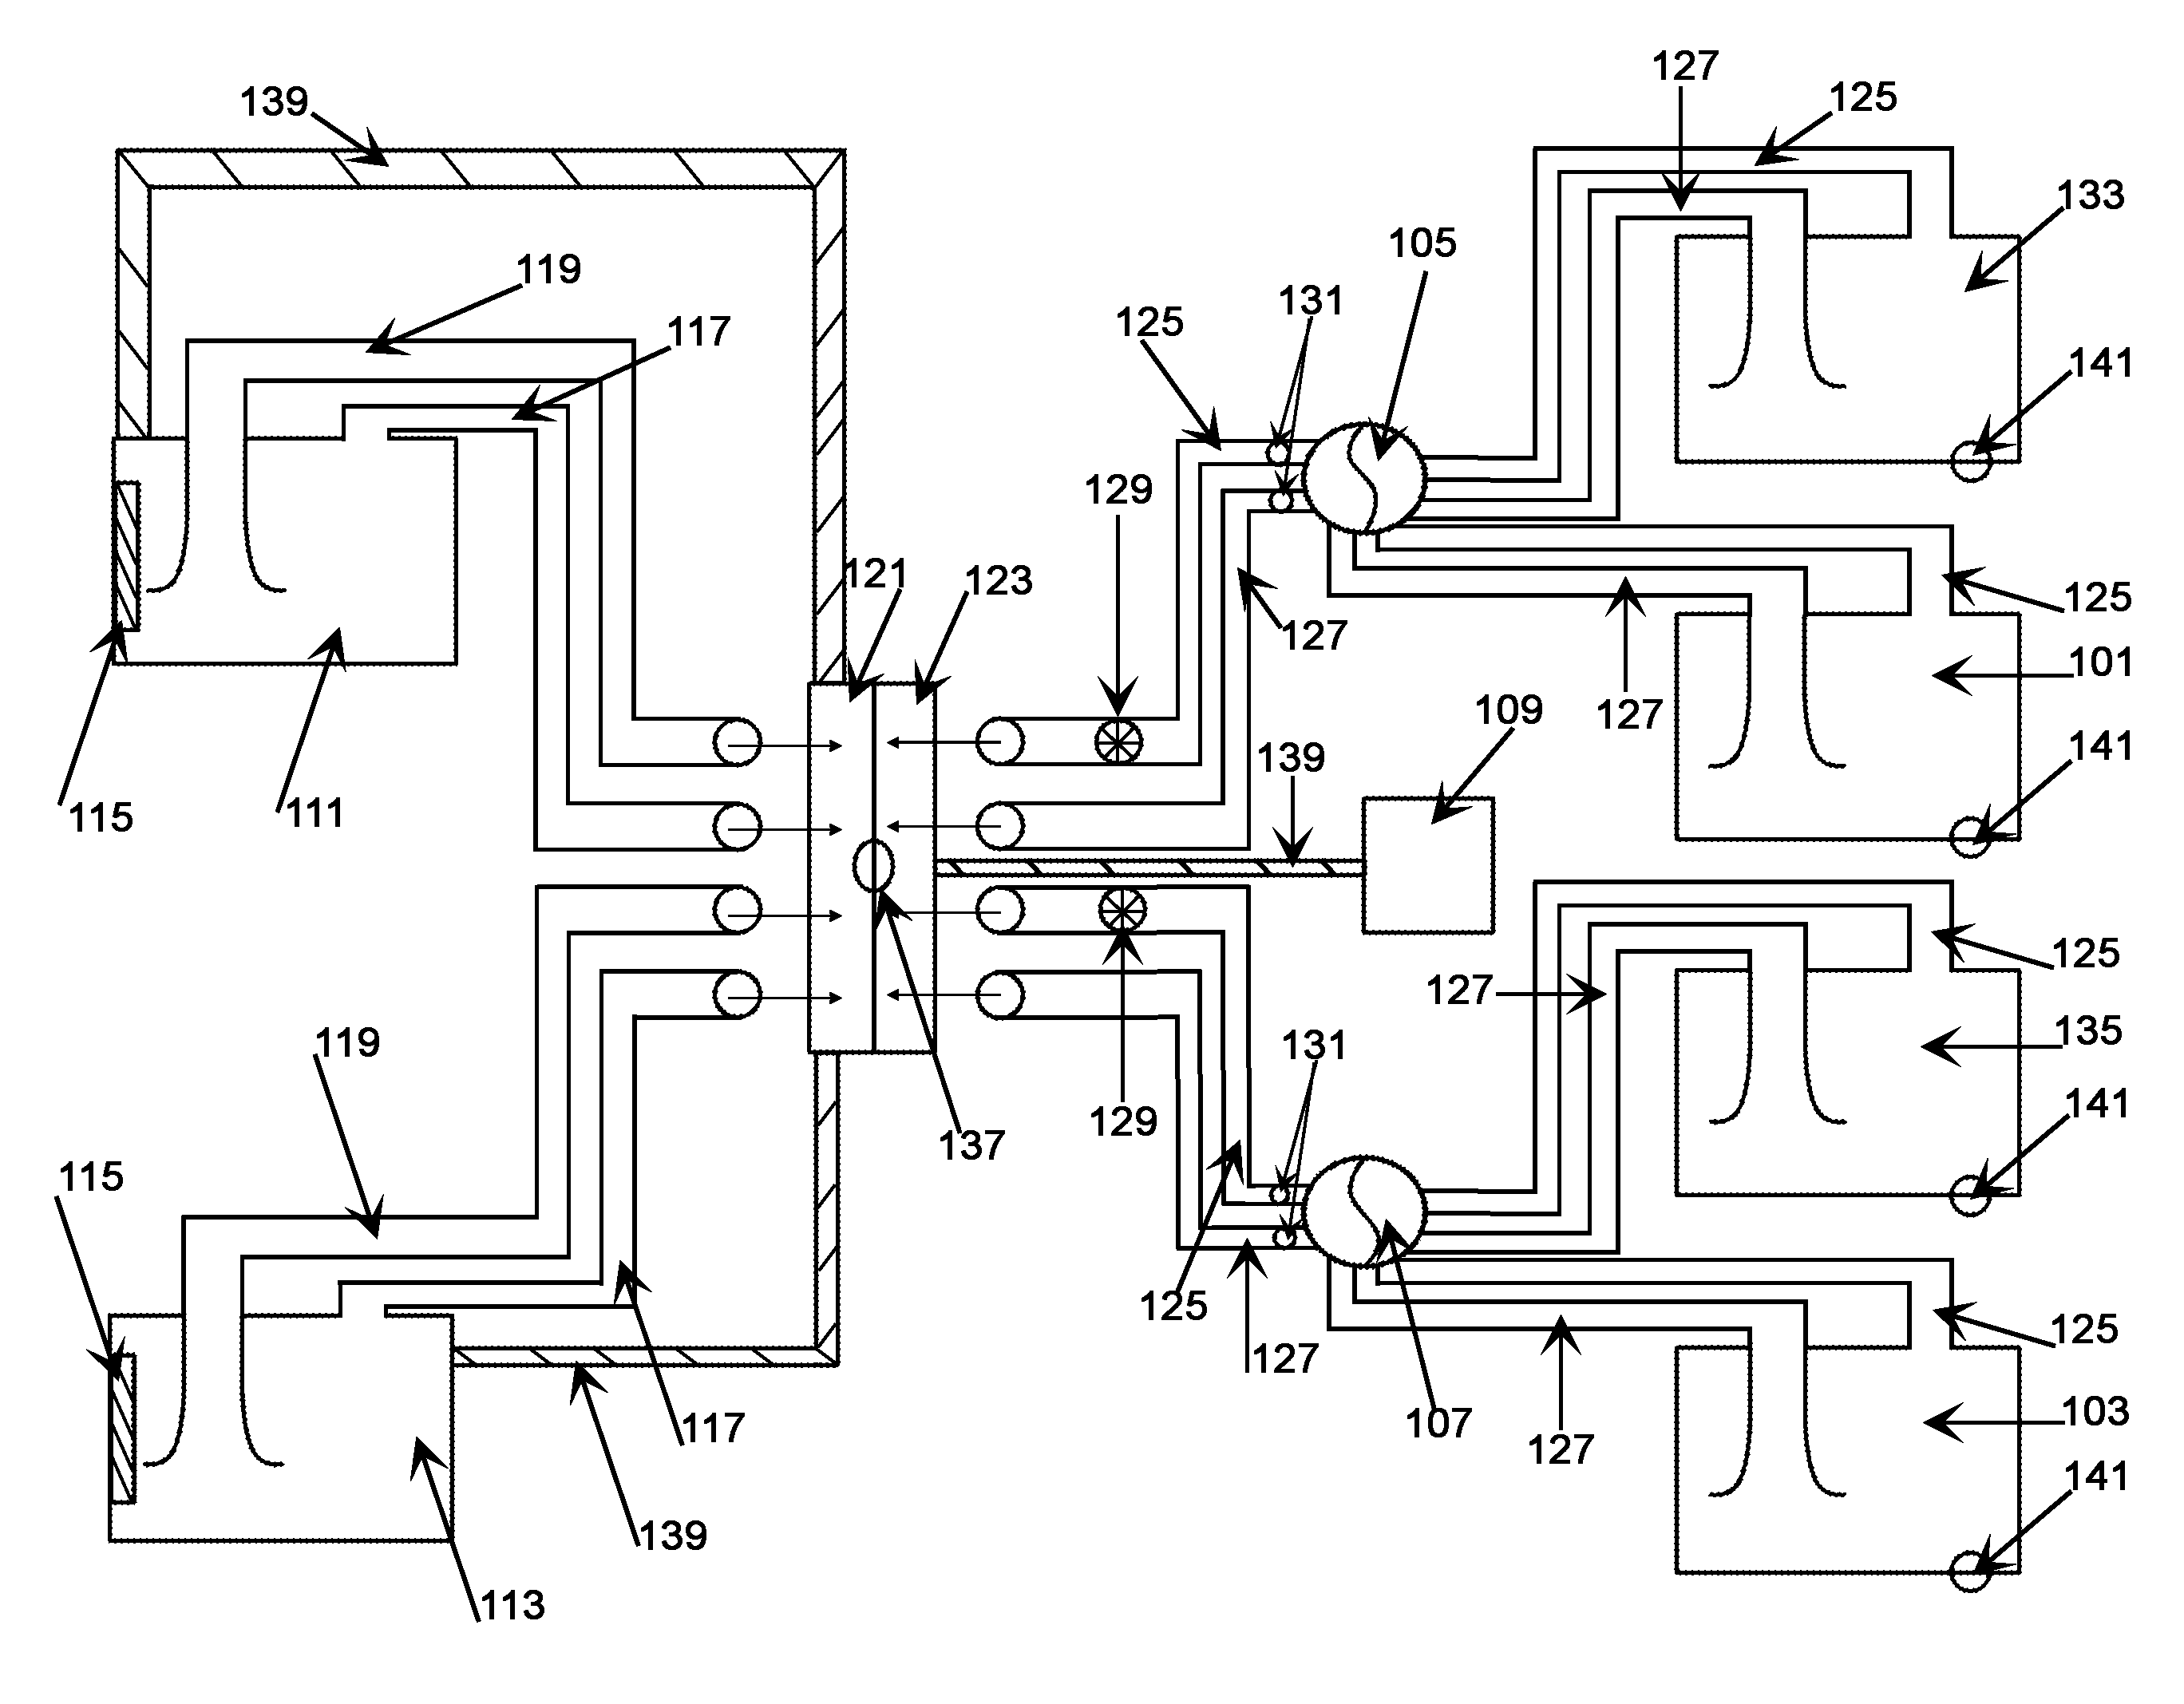 System and apparatus for rapid recharging of electric batteries